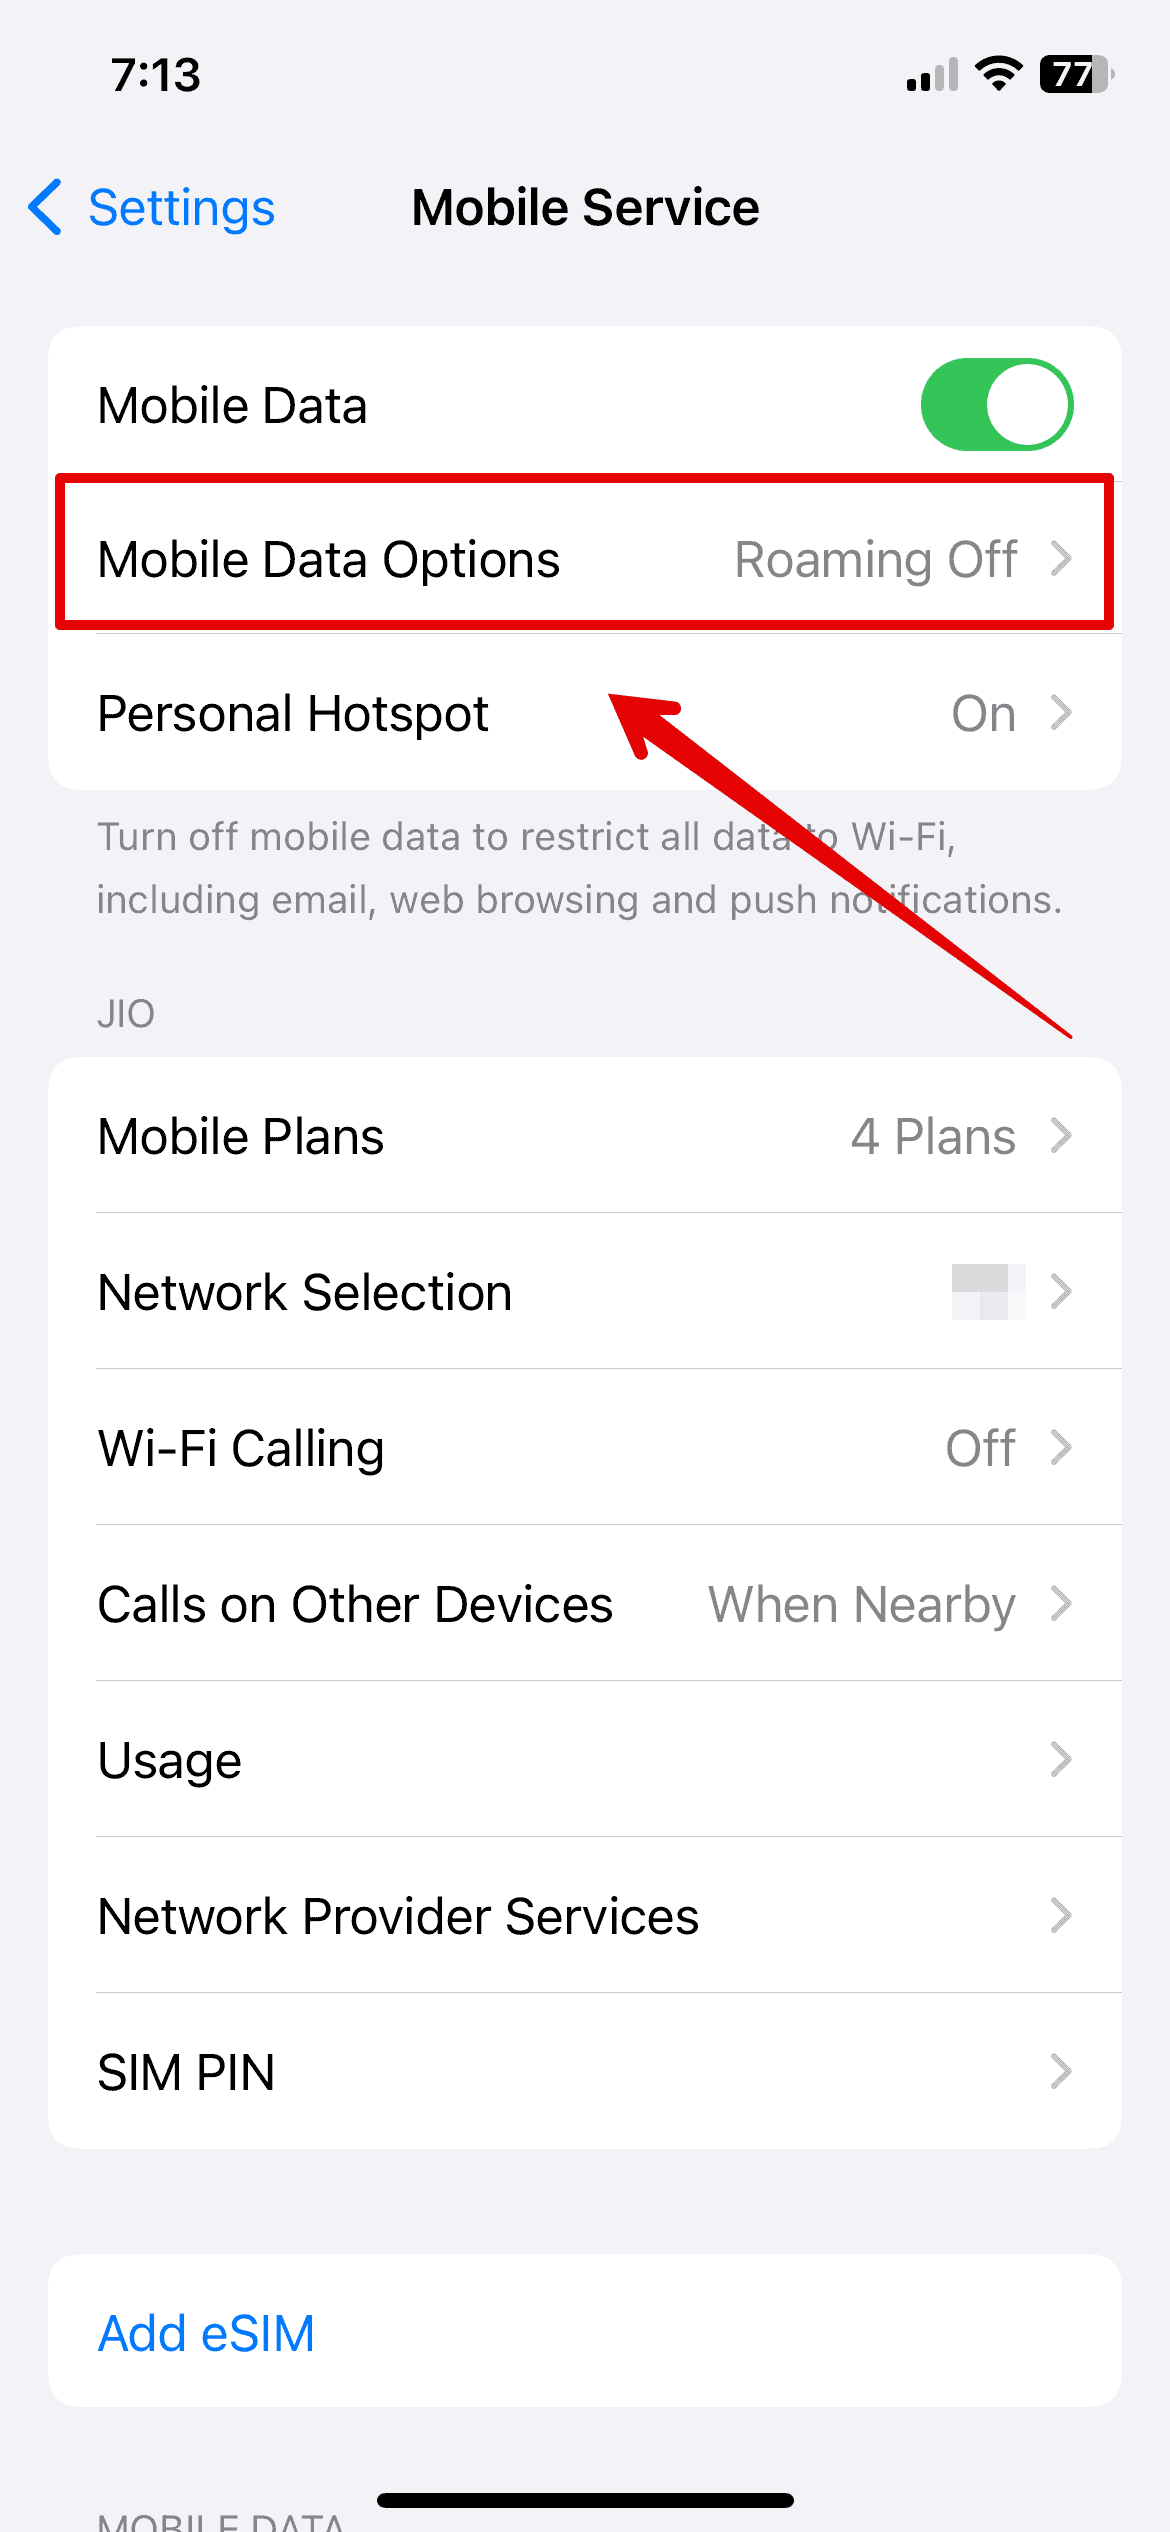 Tap on Mobile Data Options